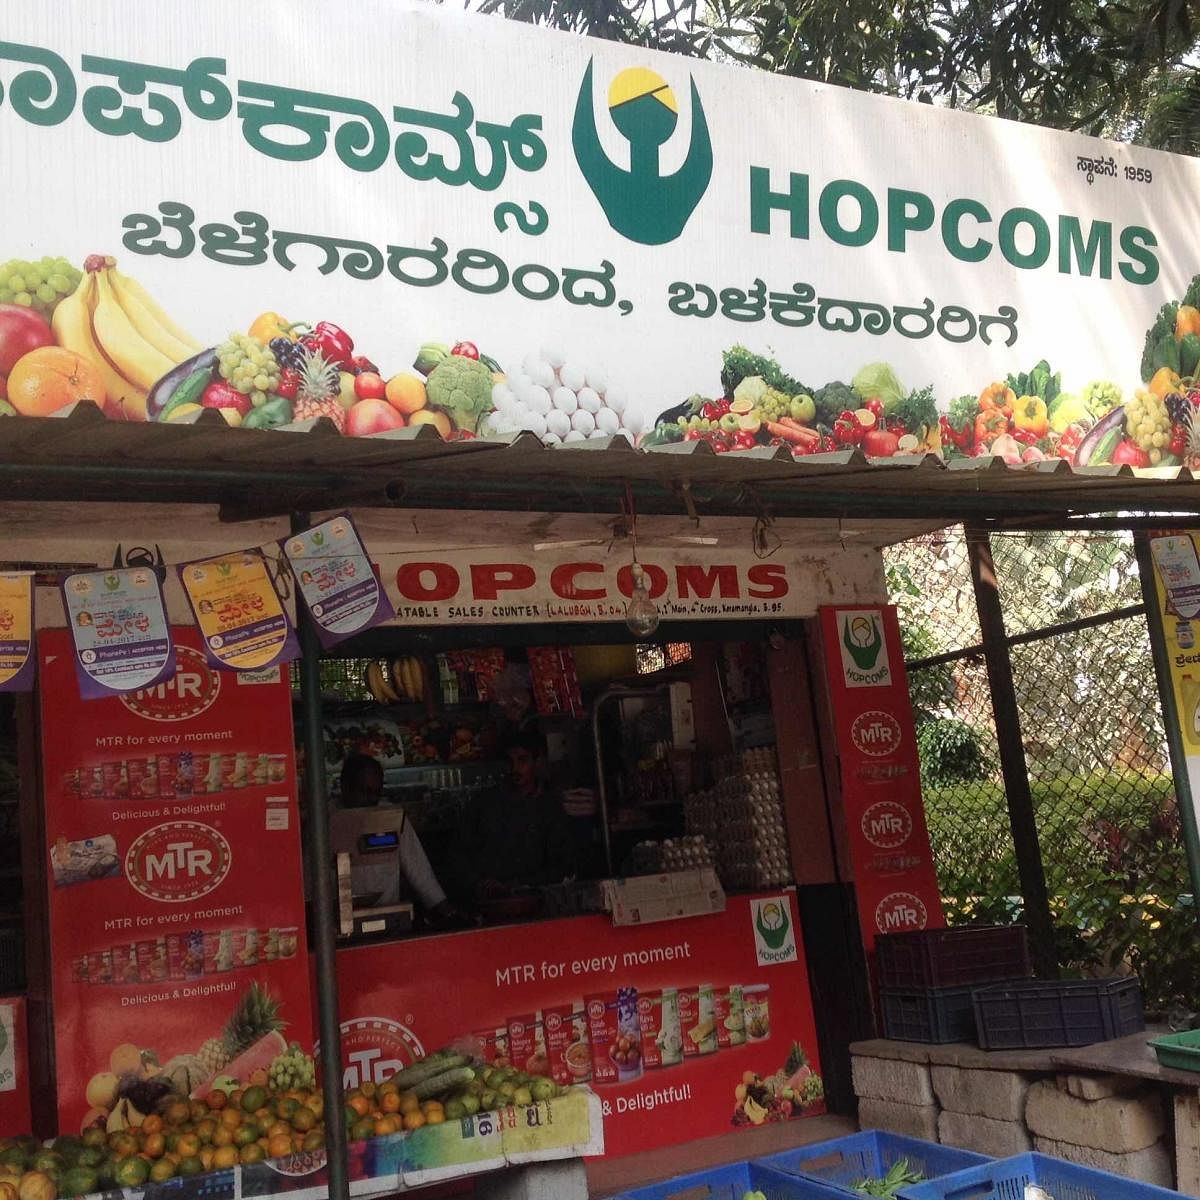 Hopcoms outlets to be revamped after 10 years